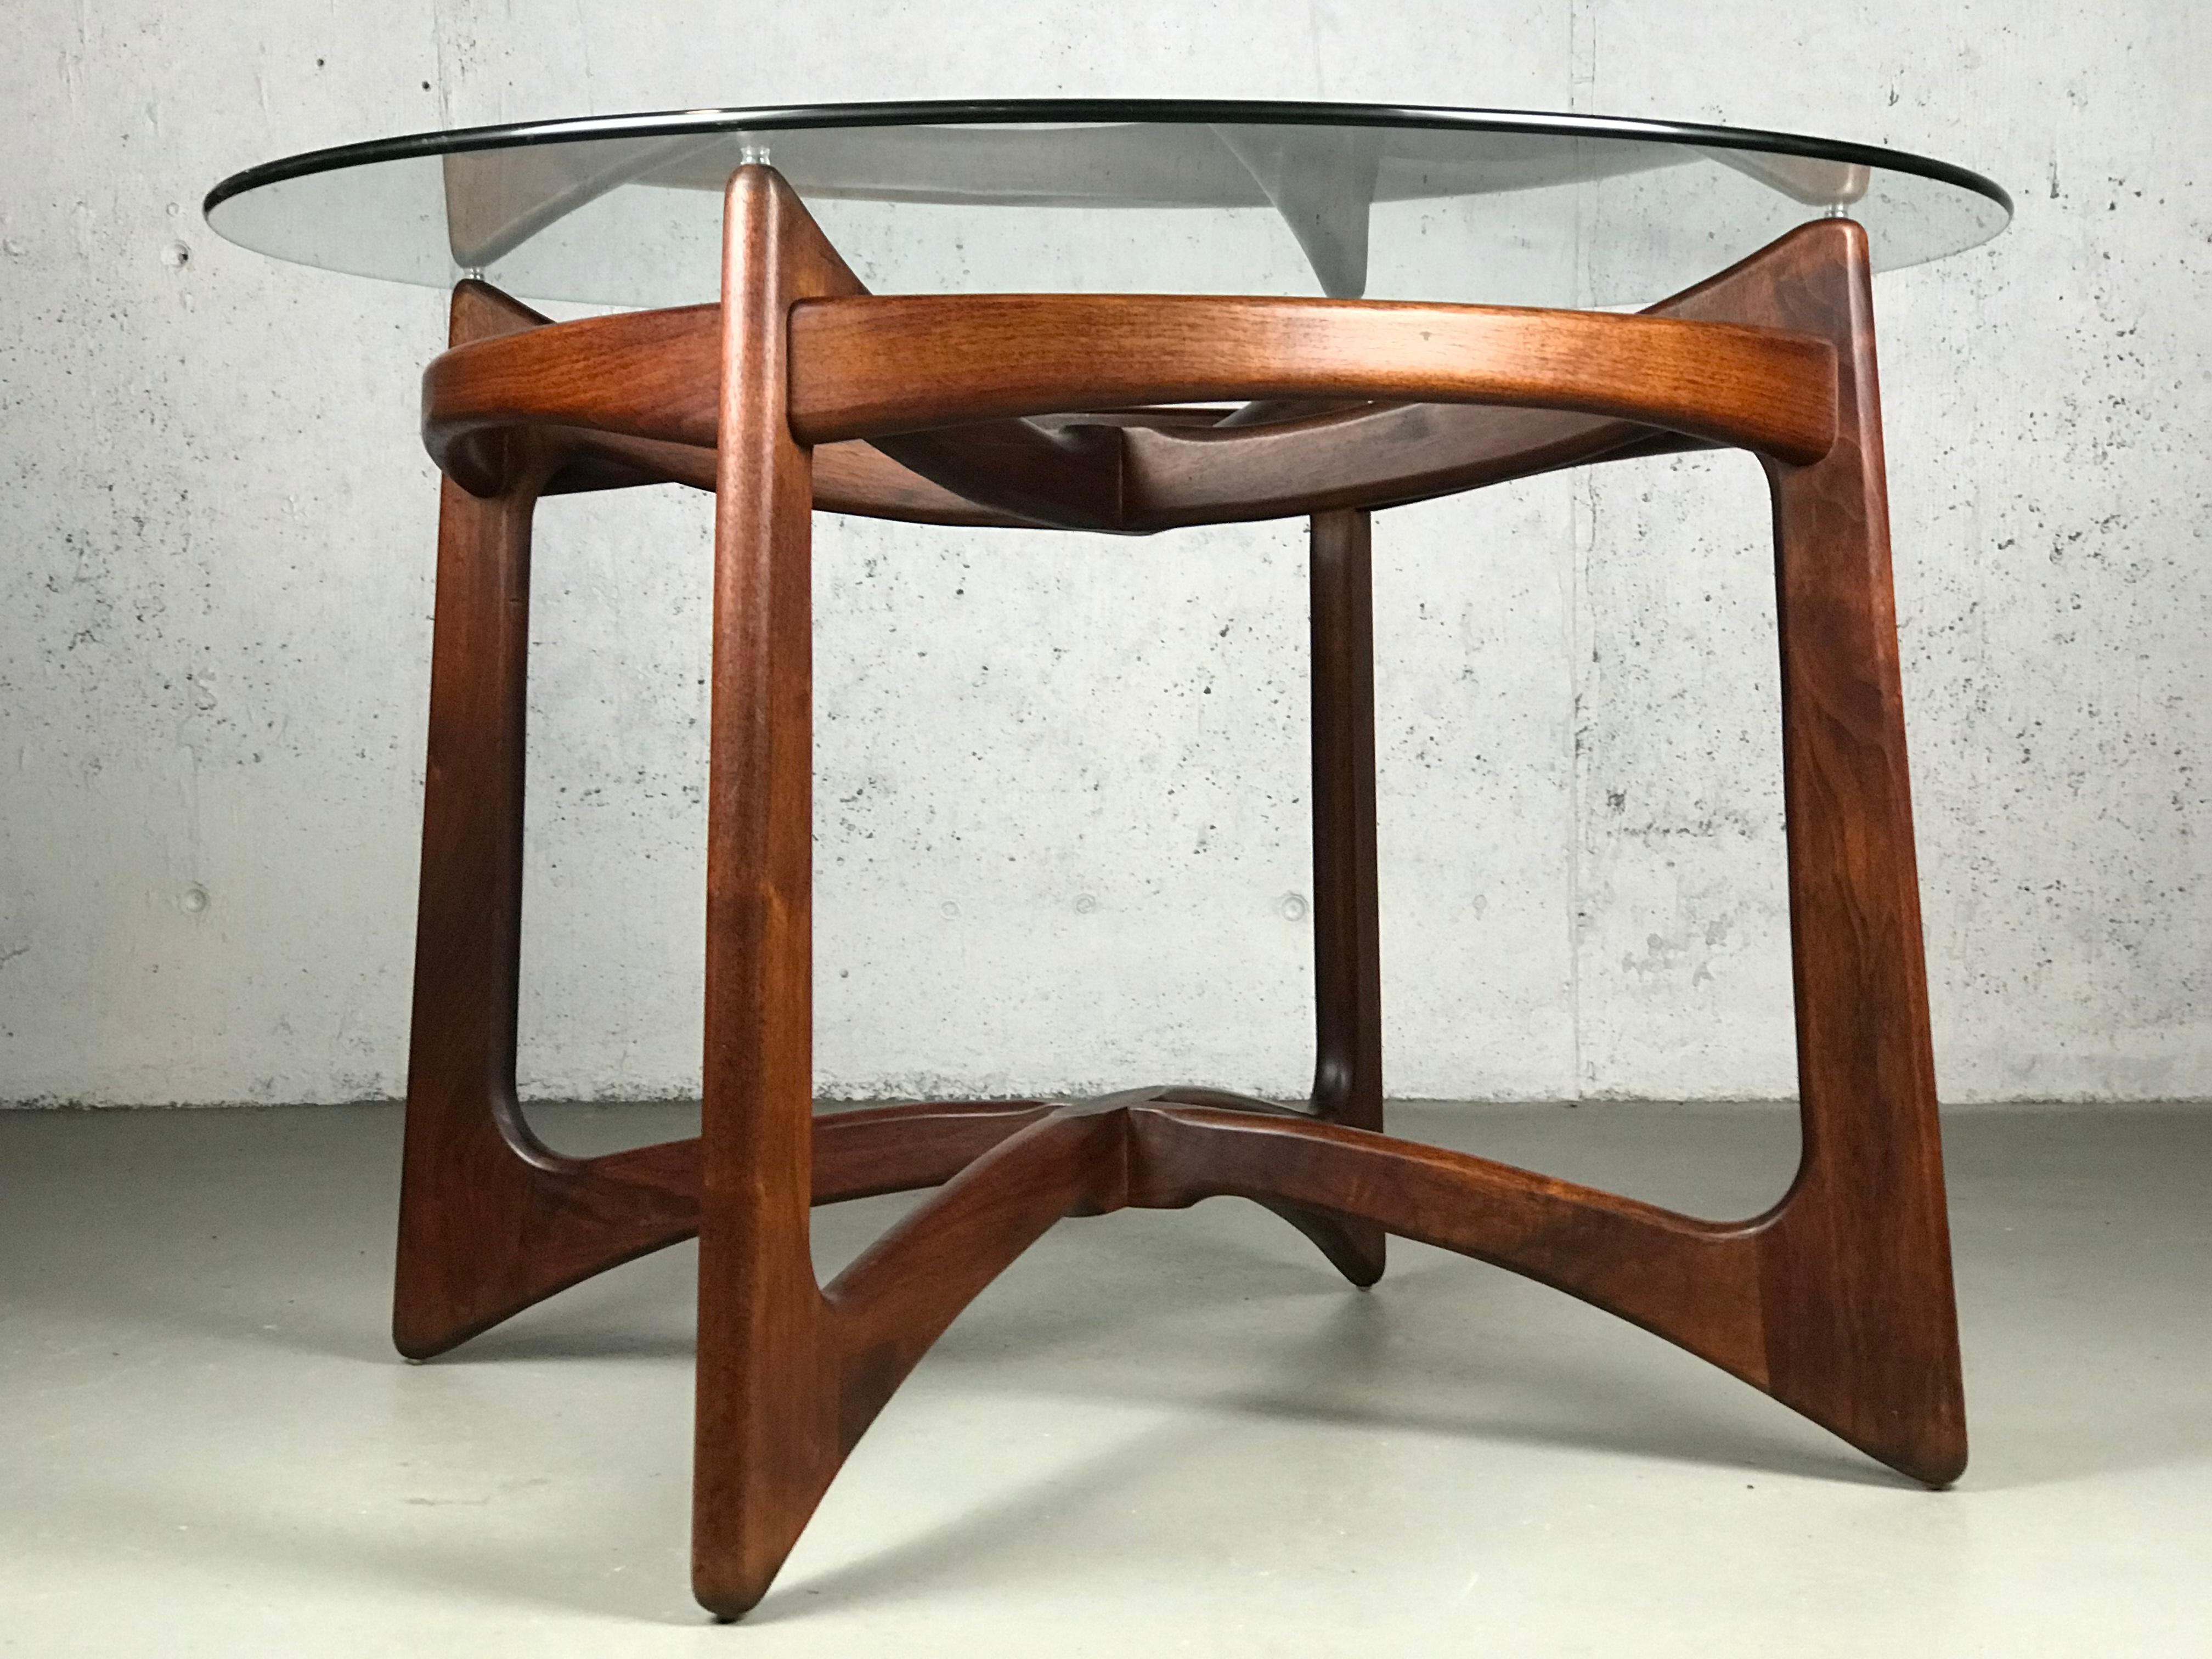 American Sculptural Walnut and Glass Dining Table by Adrian Pearsall for Craft Associates